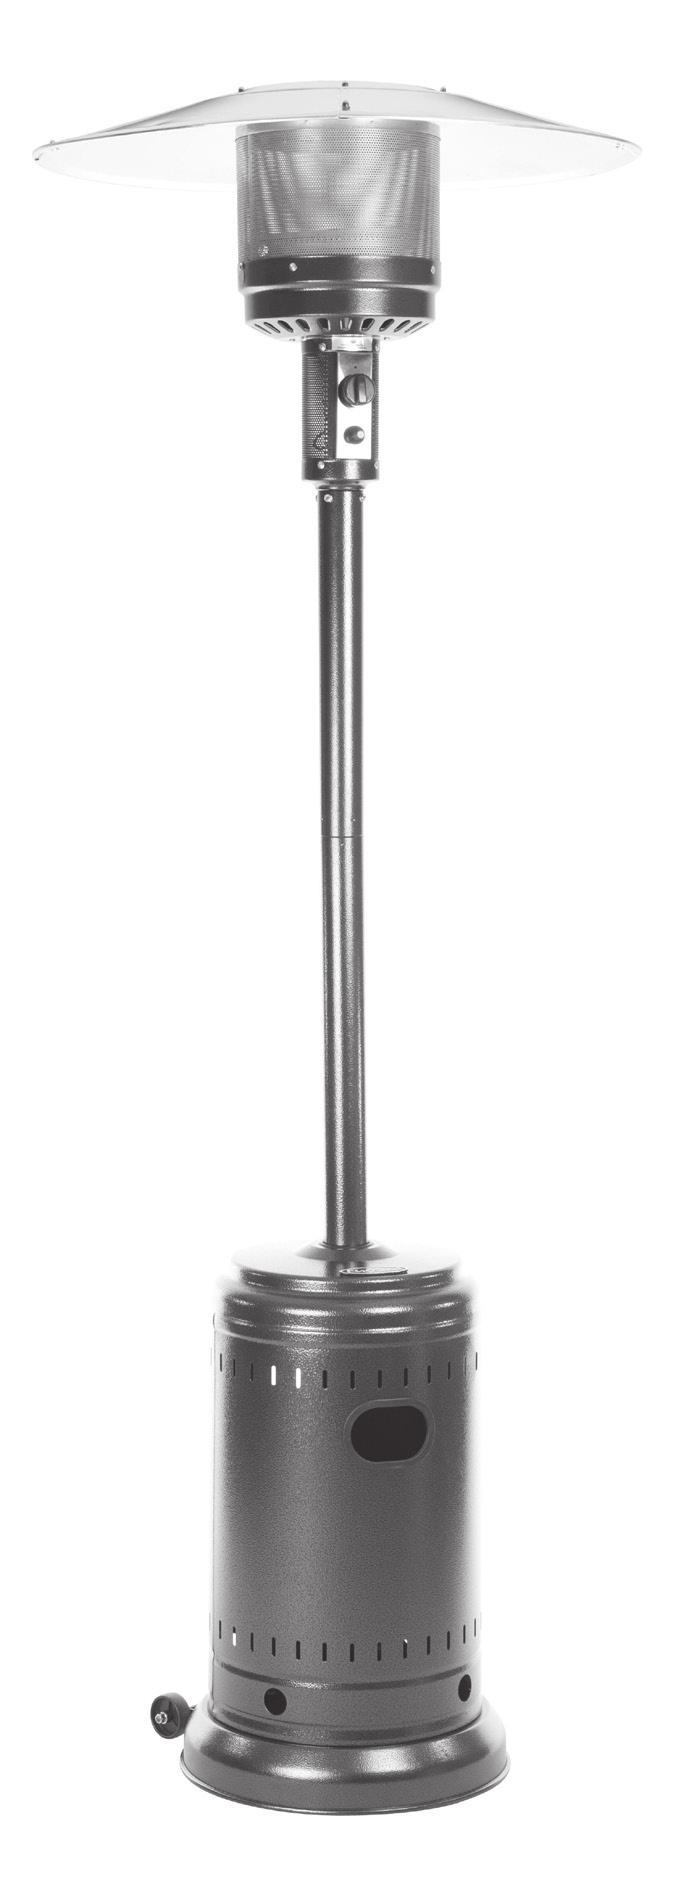 Comfort, Quality & Style Since 1998 Outdoor Patio Heater Item#: 60368, 60485, 61185, 61444, 61726, 61727, 61728, 61729, 61730, 61735, 61736, 61737, 61738, 61739, 61740, 61741, 61742, 61743 DANGER FOR